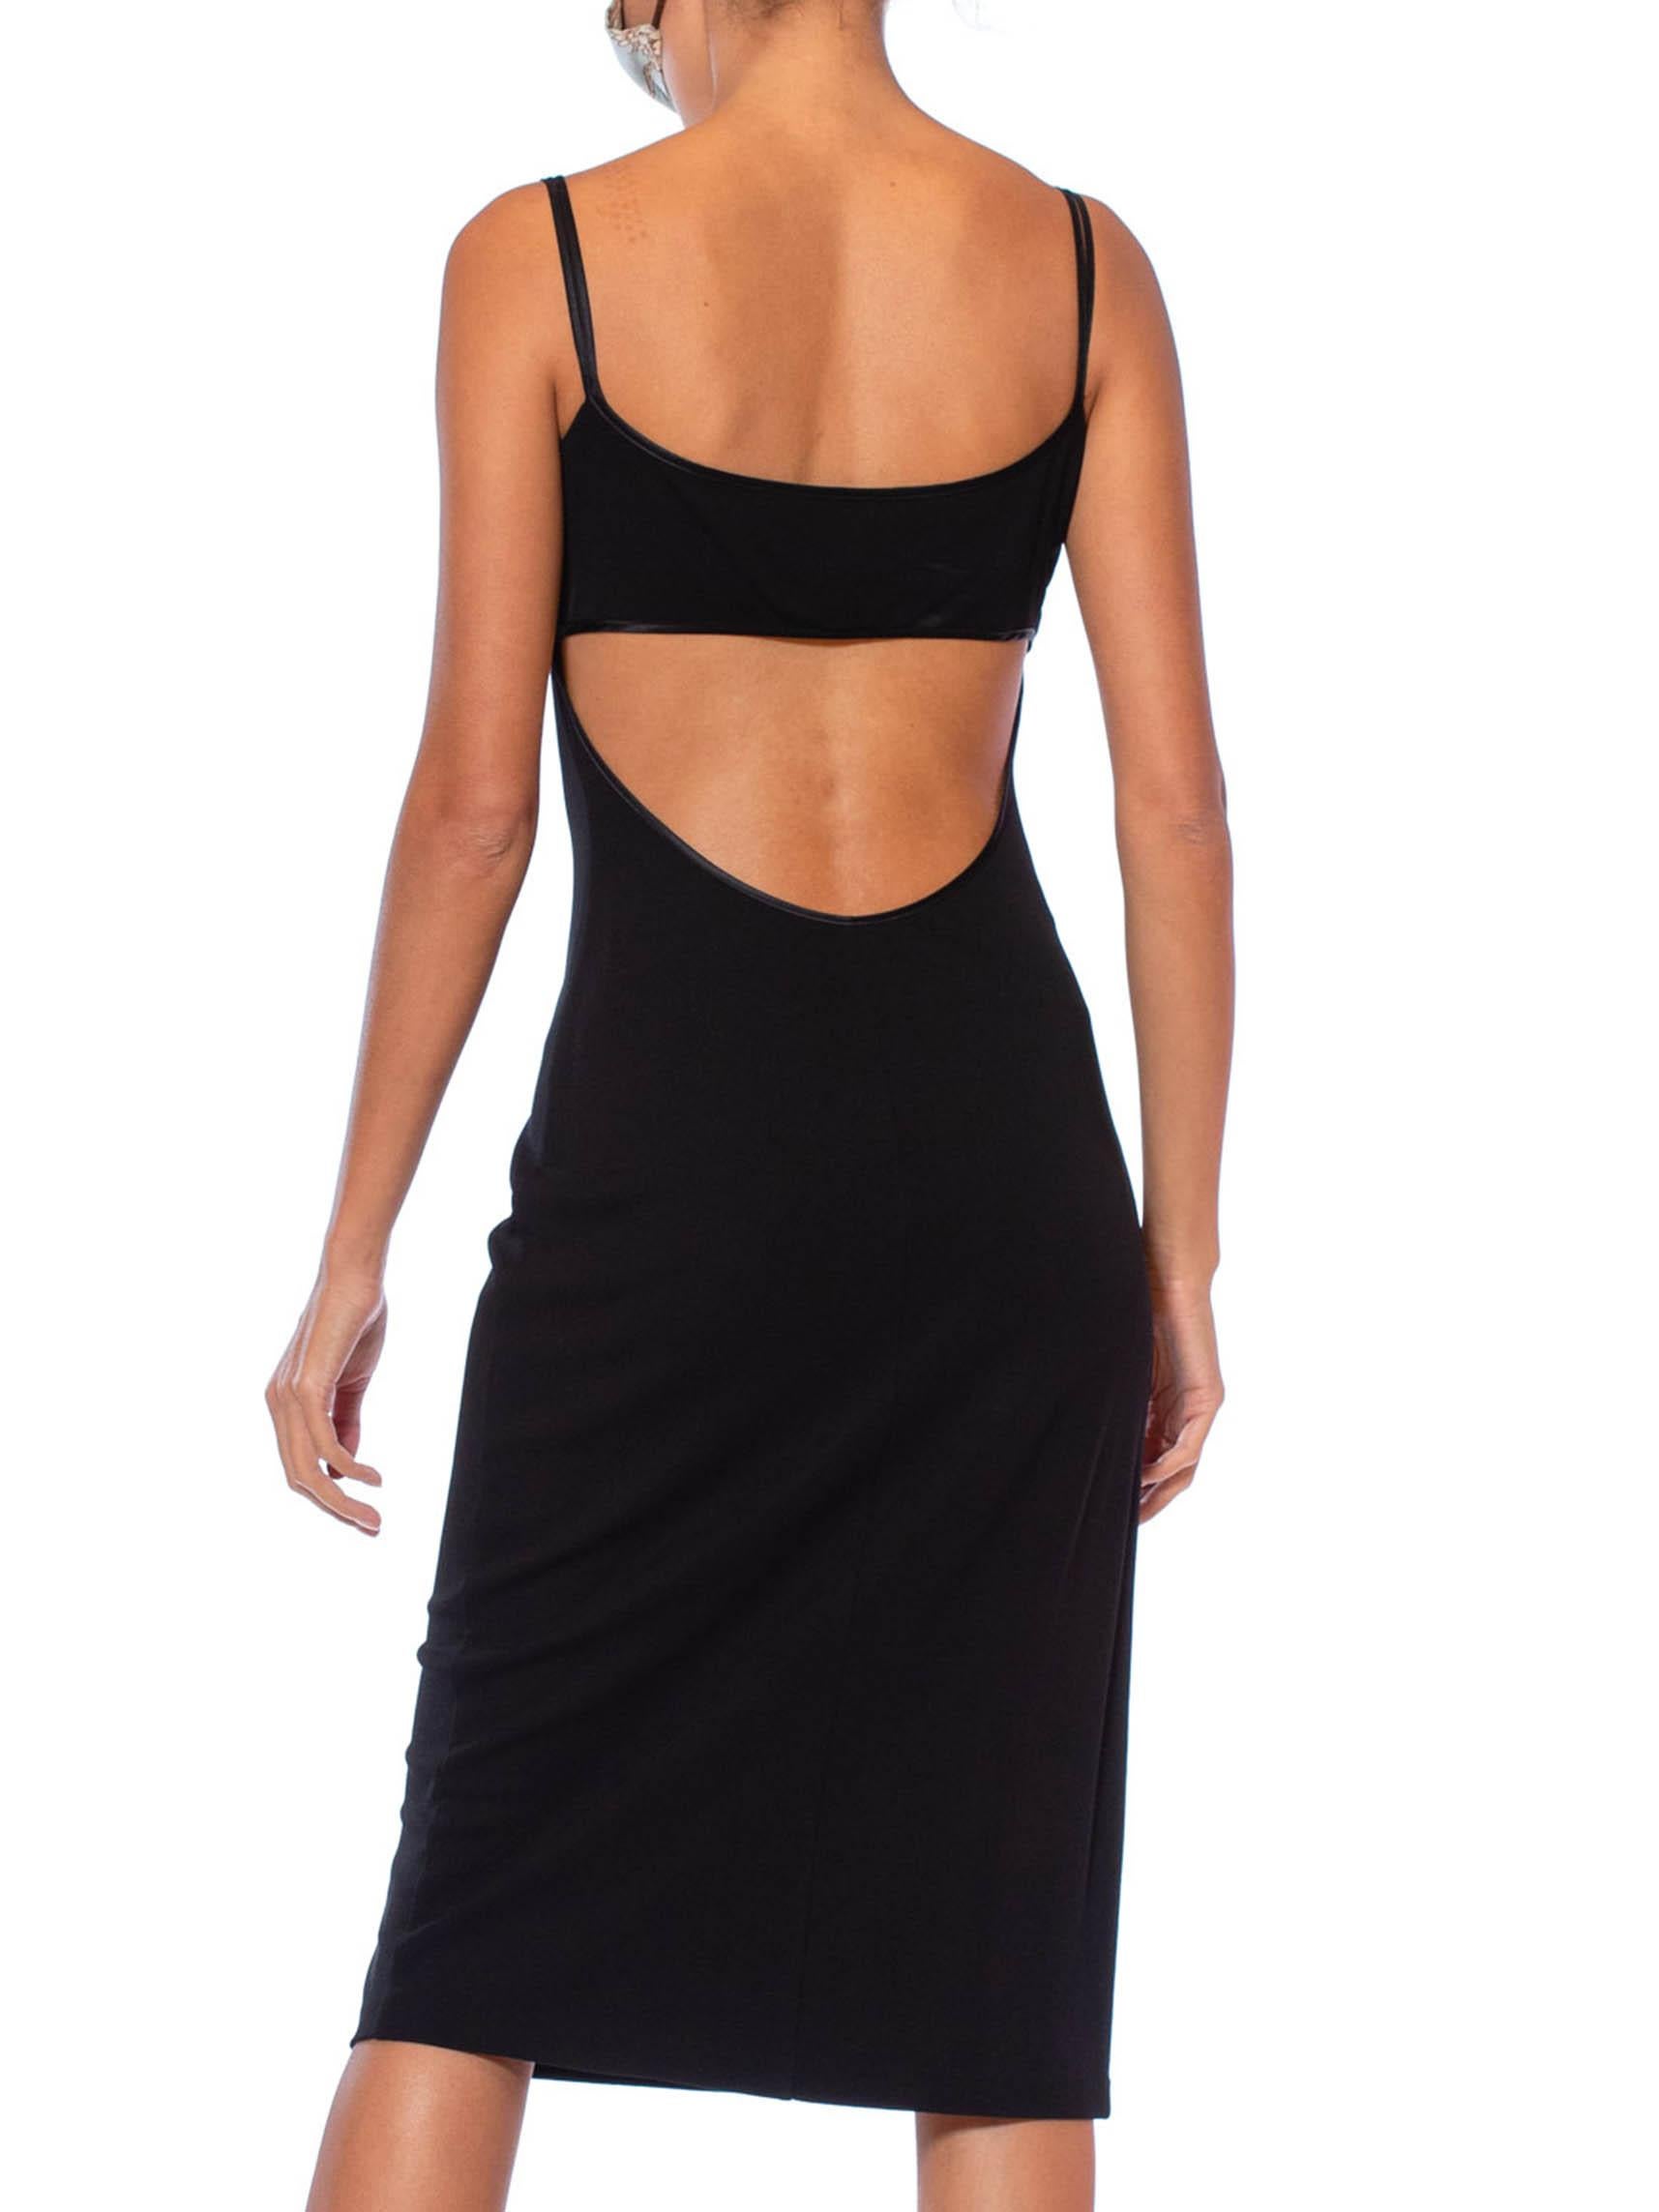 1990S RICHARD TYLER Black Rayon Jersey Open Back Body-Con Cocktail Dress With S 4